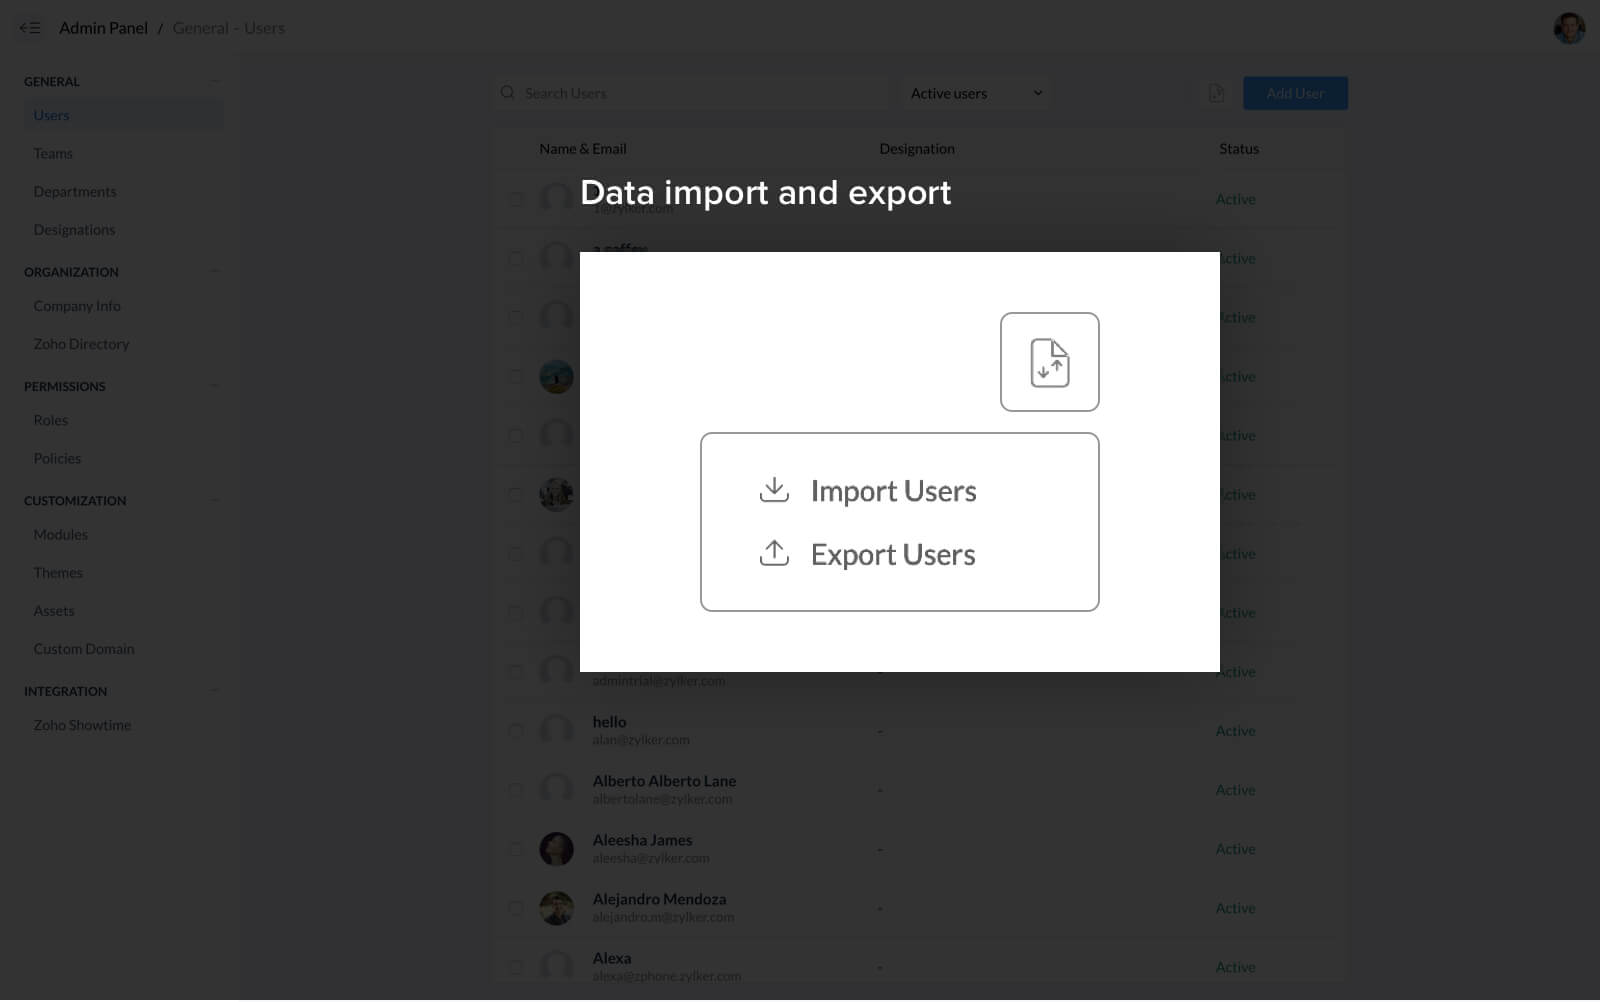 Data import and export